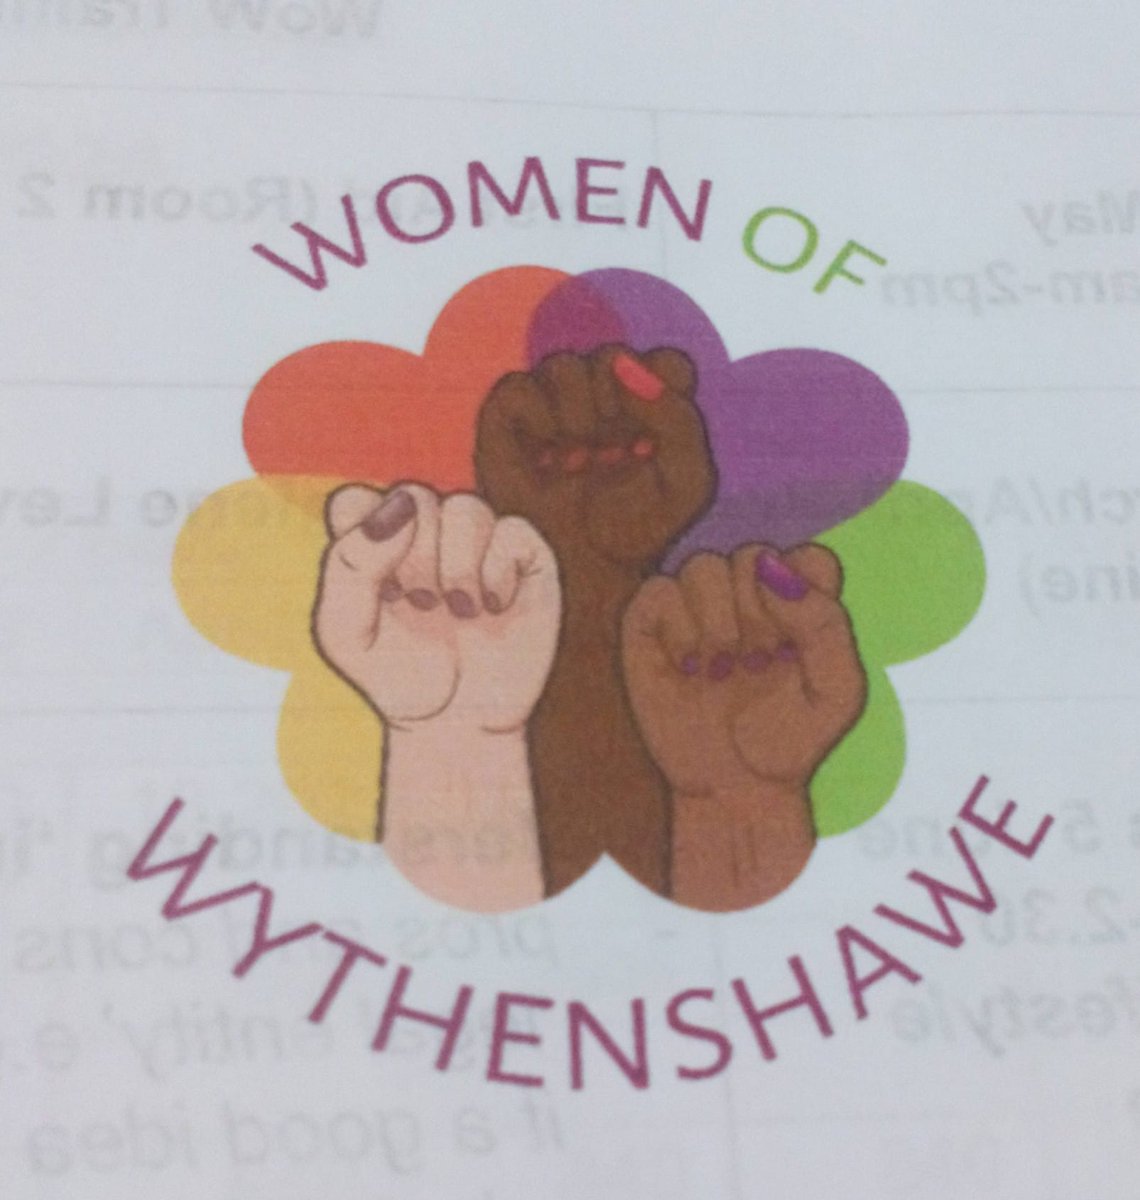 Steering Group Meeting with Women of Wythenshawe today including looking at this document, inspiring stuff.